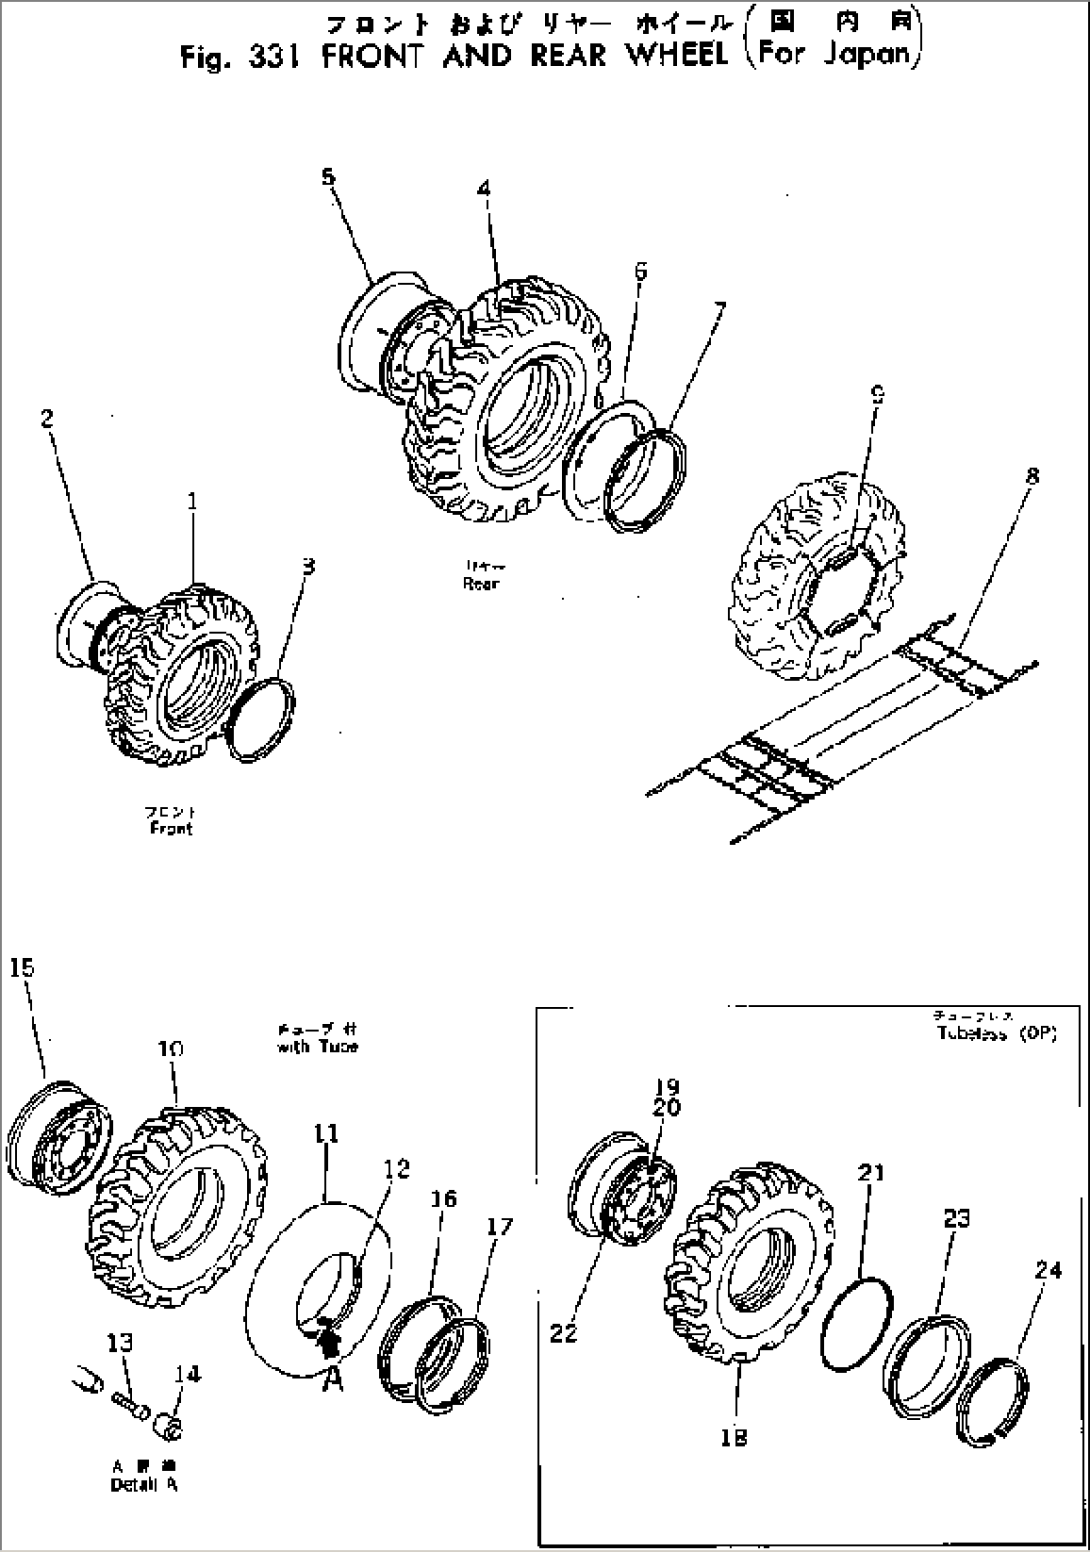 FRONT AND REAR WHEEL (FOR JAPAN)